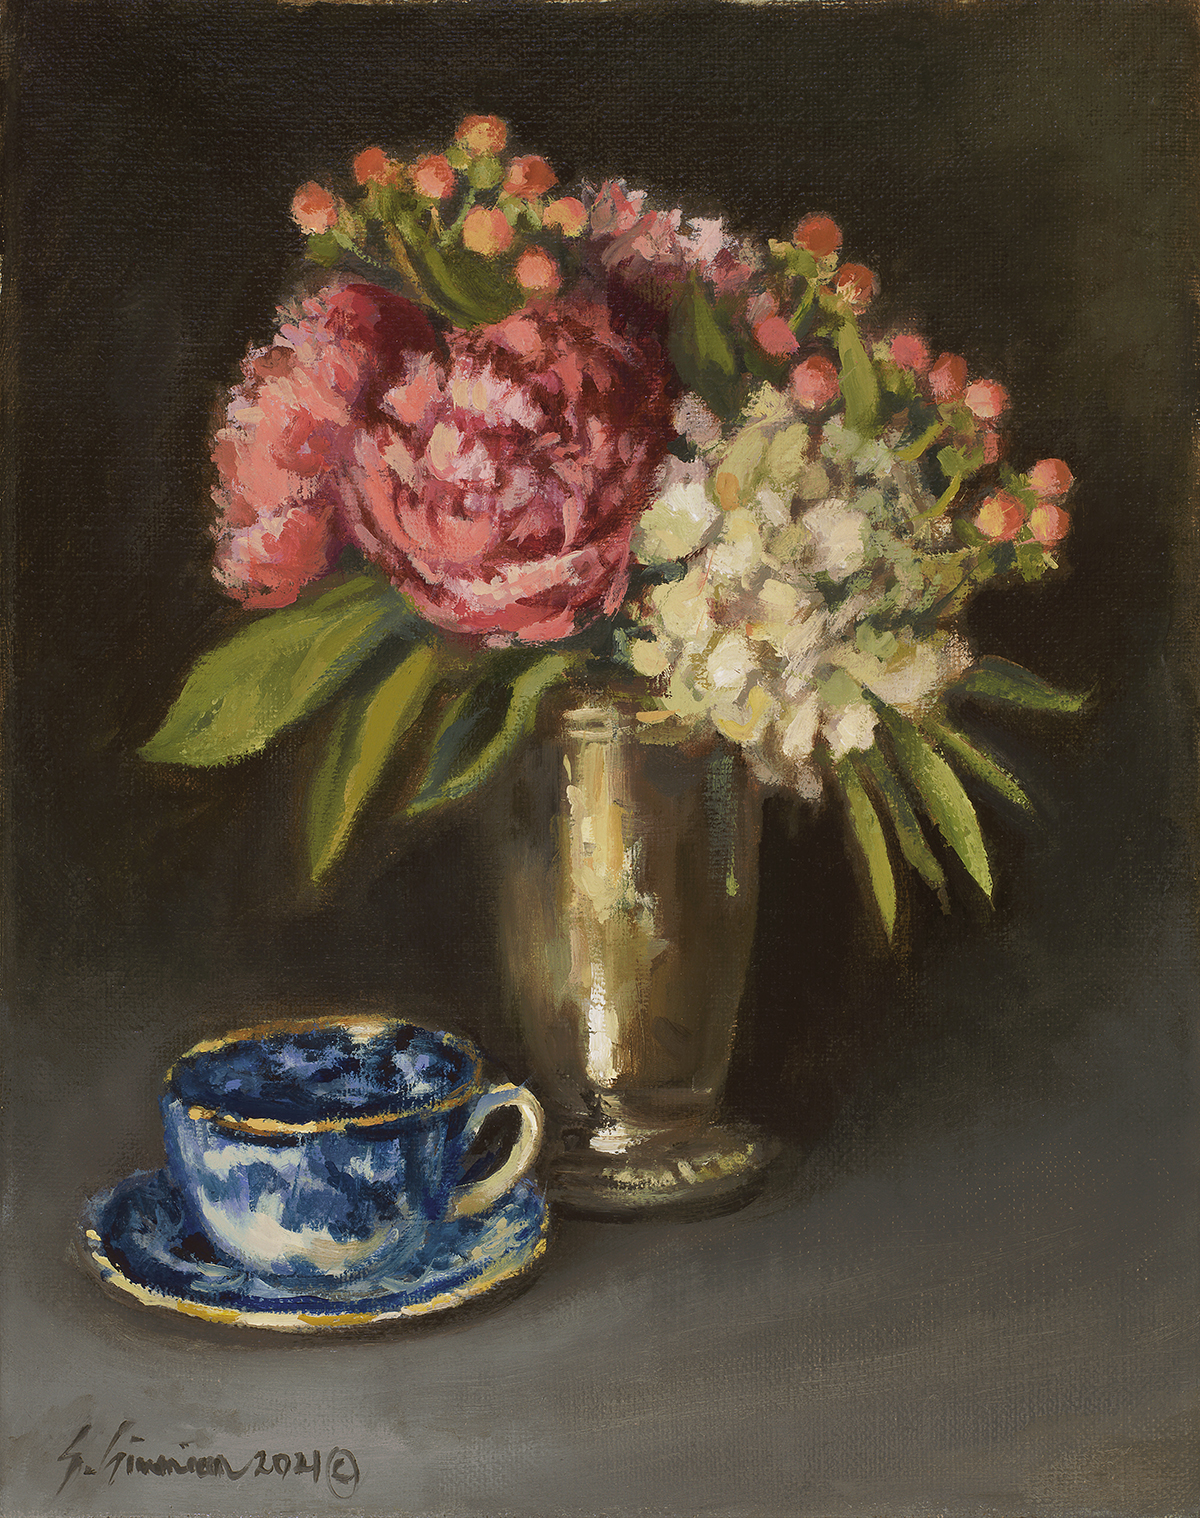 Peonies and Hydrangeas With Blue Tea Cup